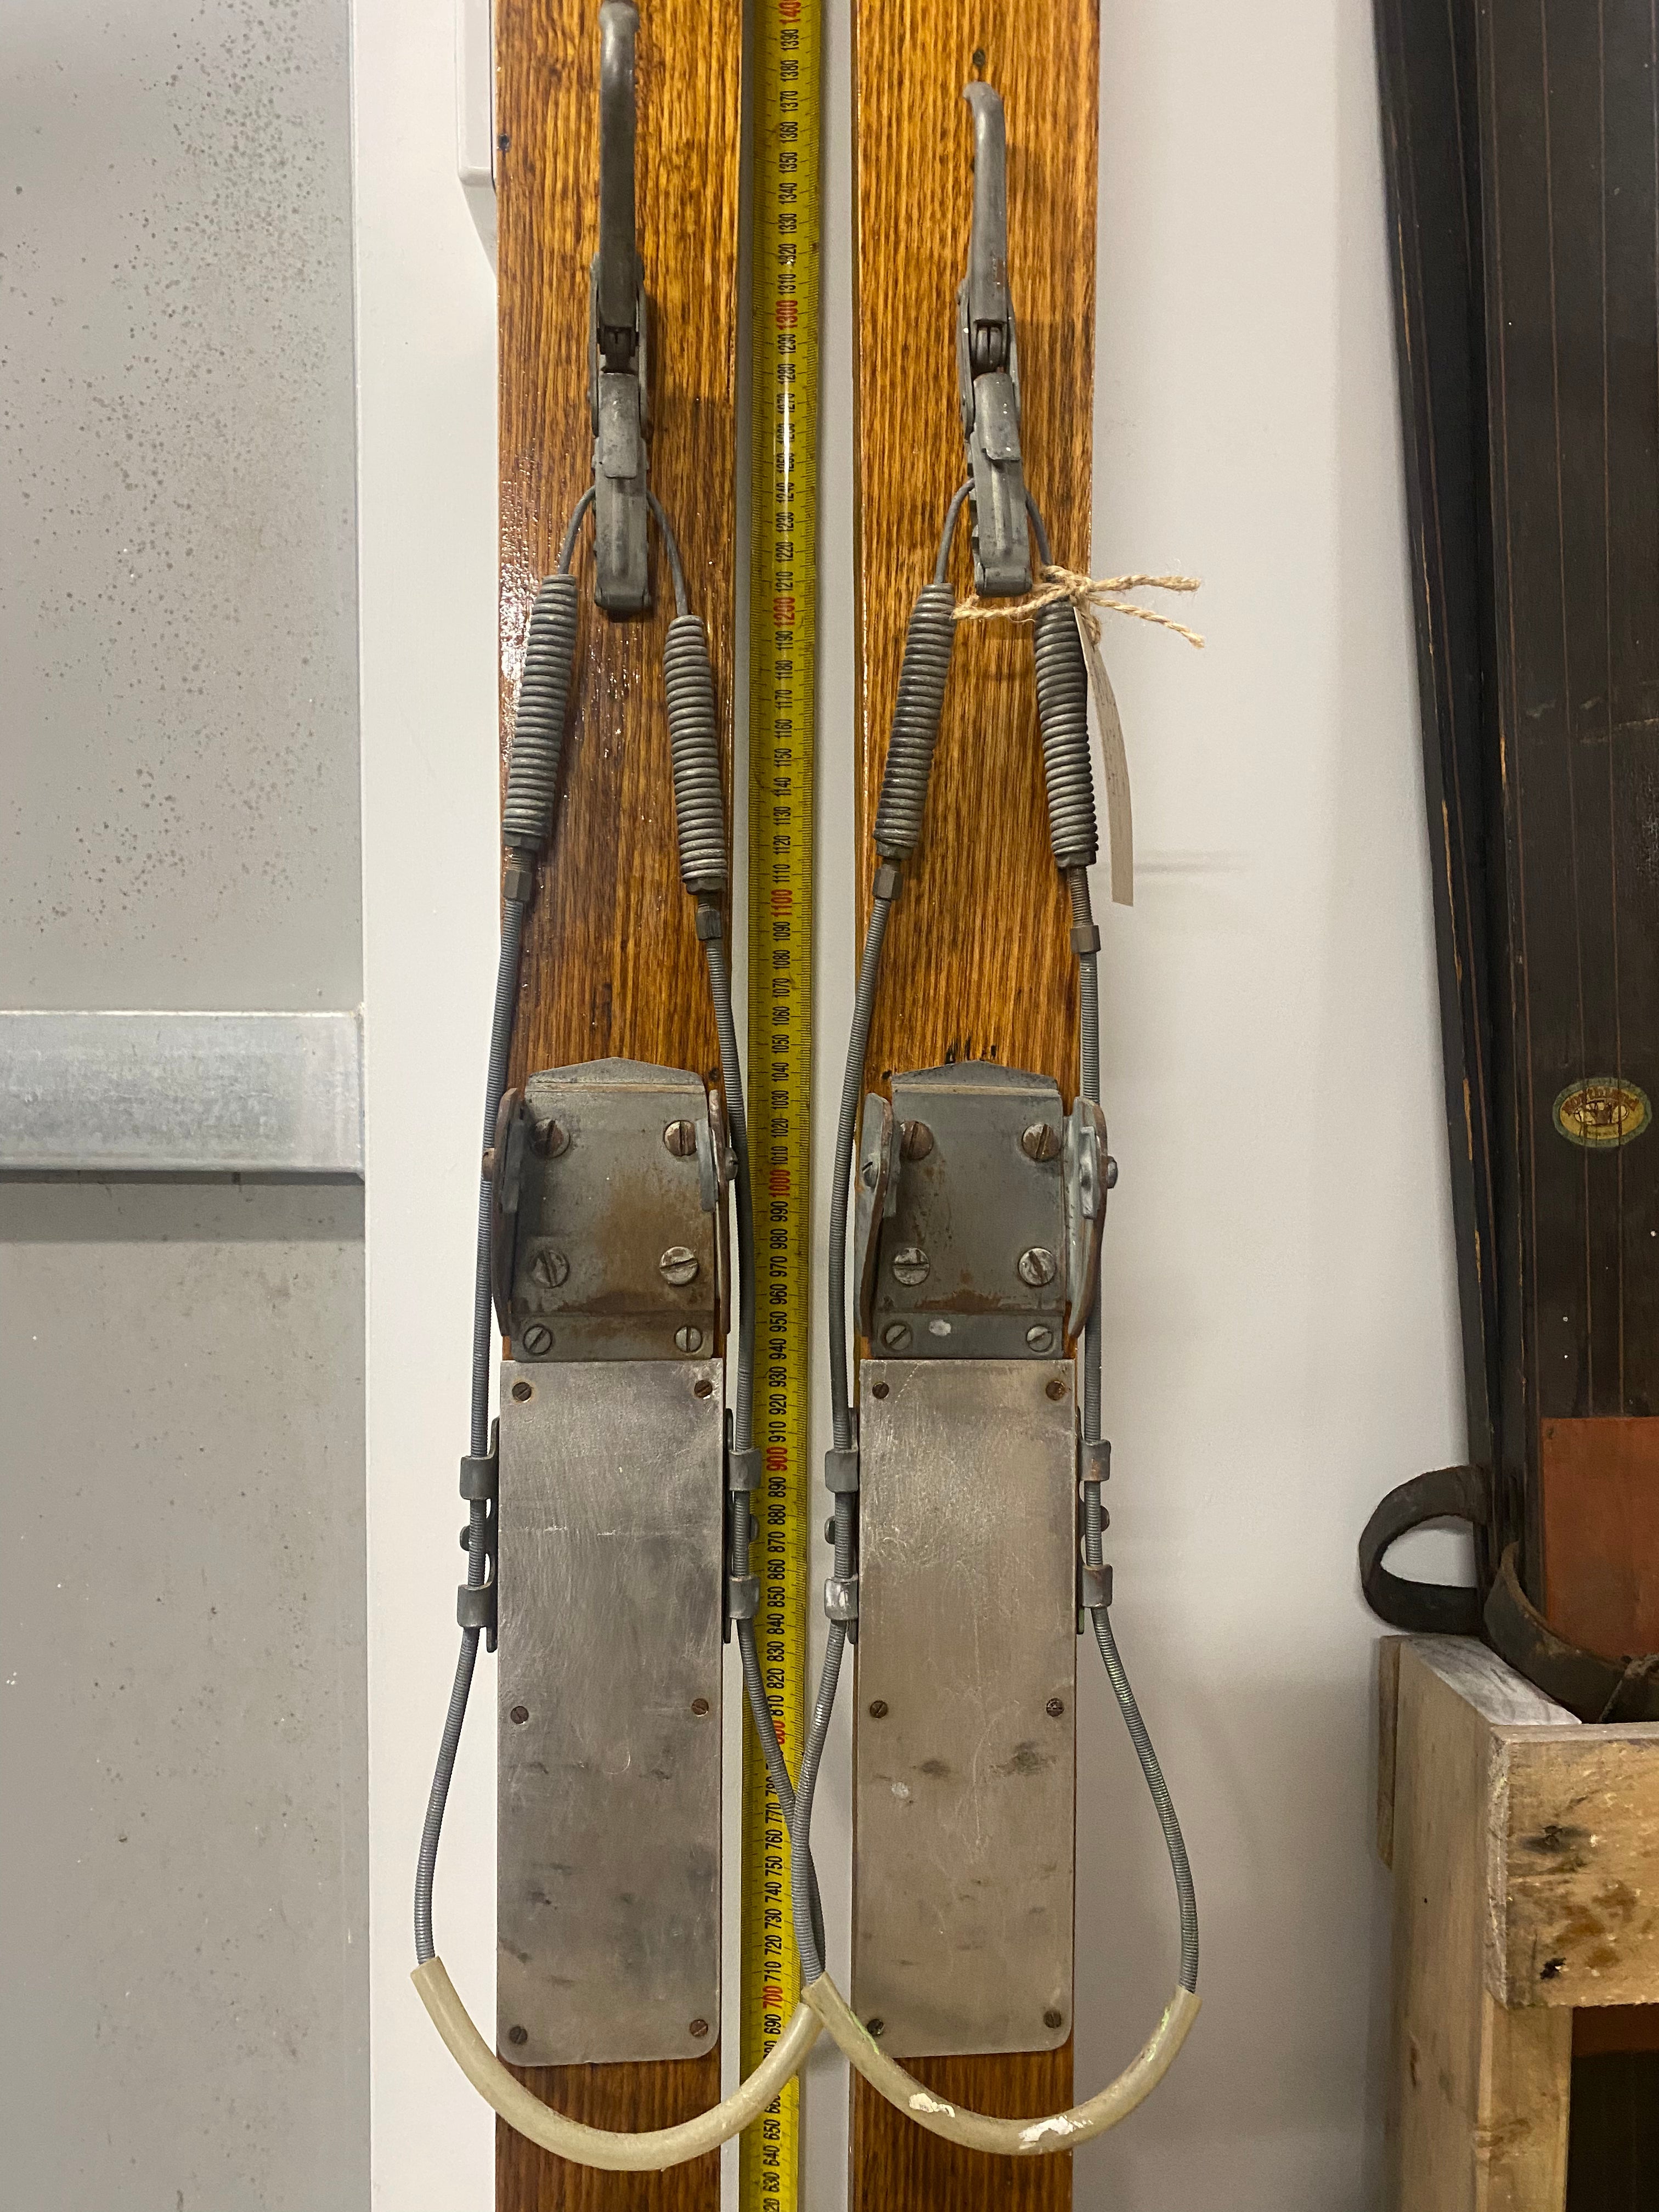 Ski Bindings Front View: Vintage Wooden Skis with metal bindings. Lent against a white wall, with a tape measure behind the skis